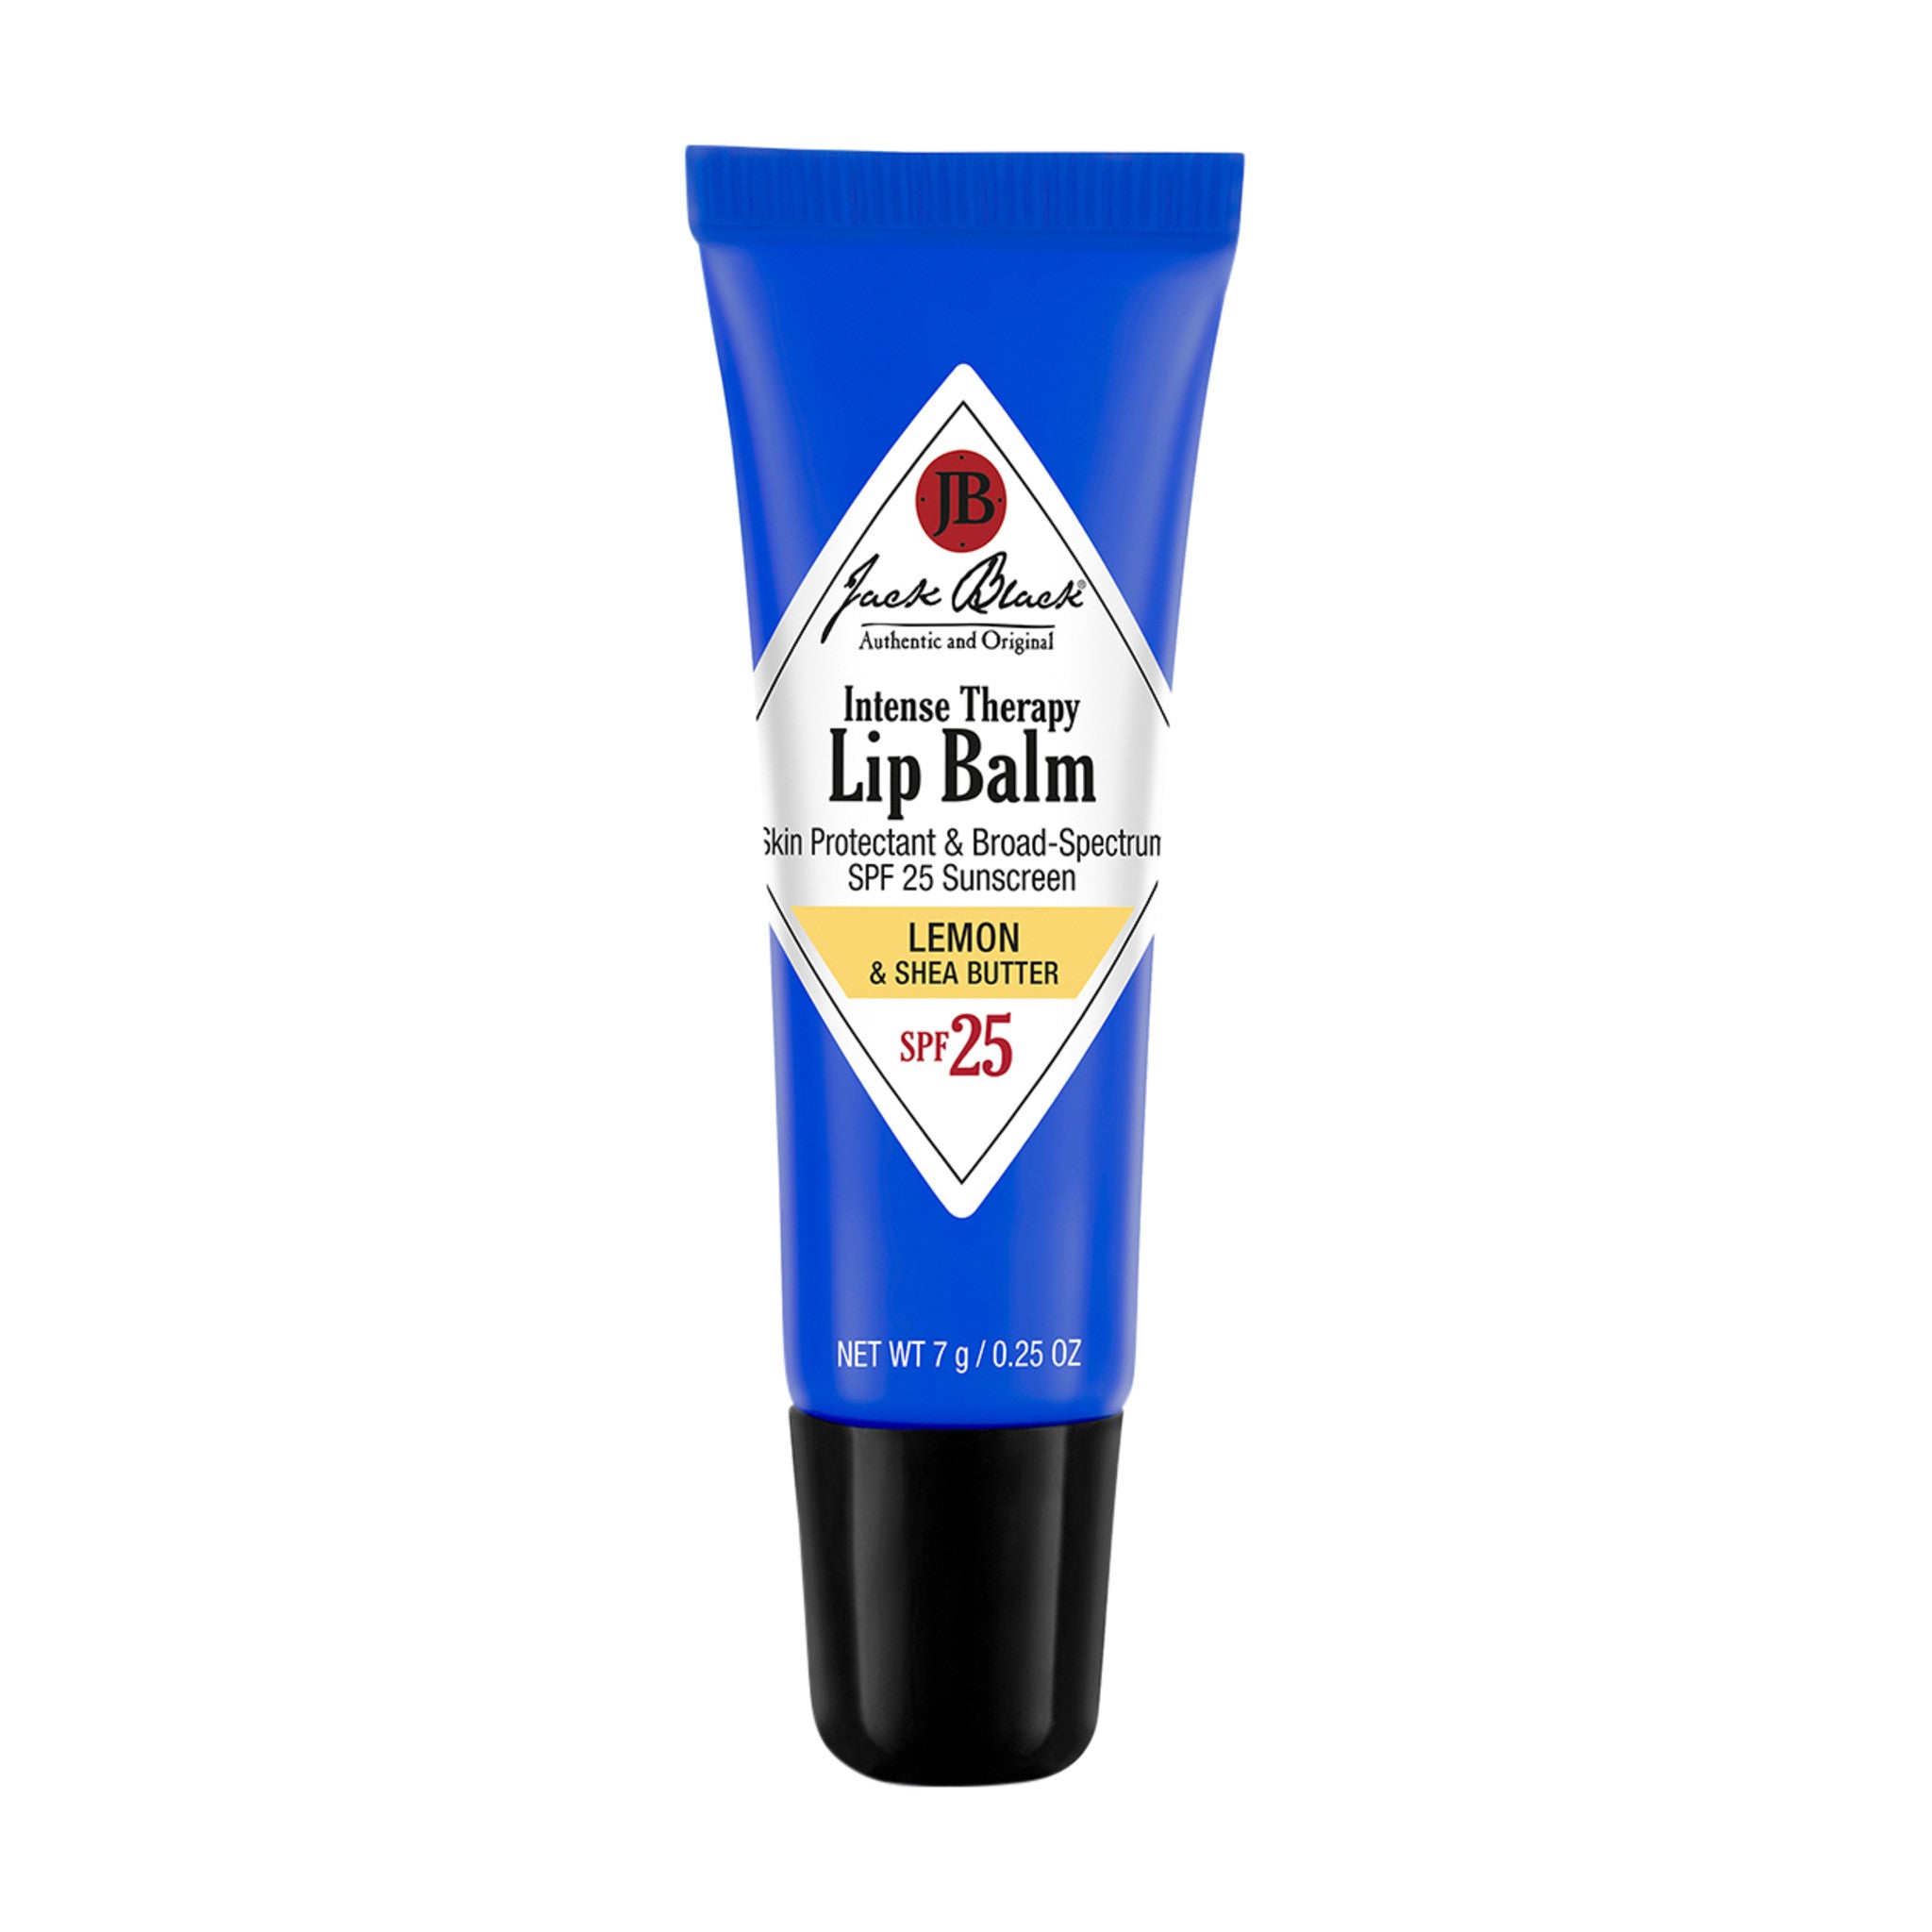 Jack Black Intense Therapy Lip Balm SPF 25 Color/Shade variant: Lemon and Shea Butter main image.